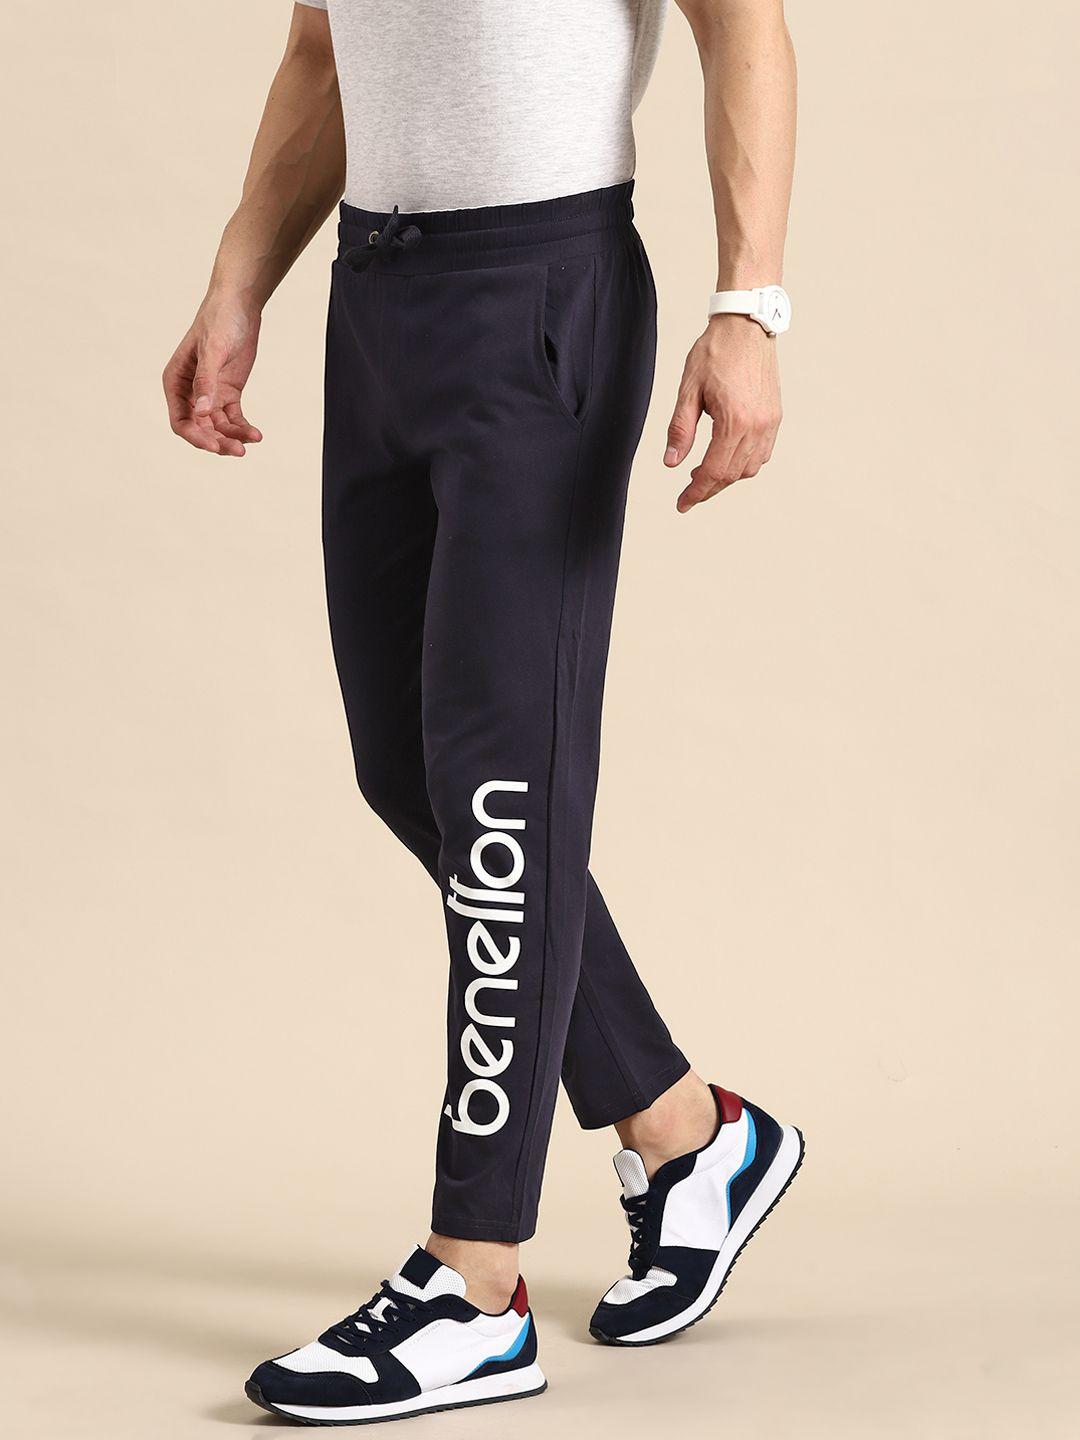 united colors of benetton men pure cotton brand logo printed track pants